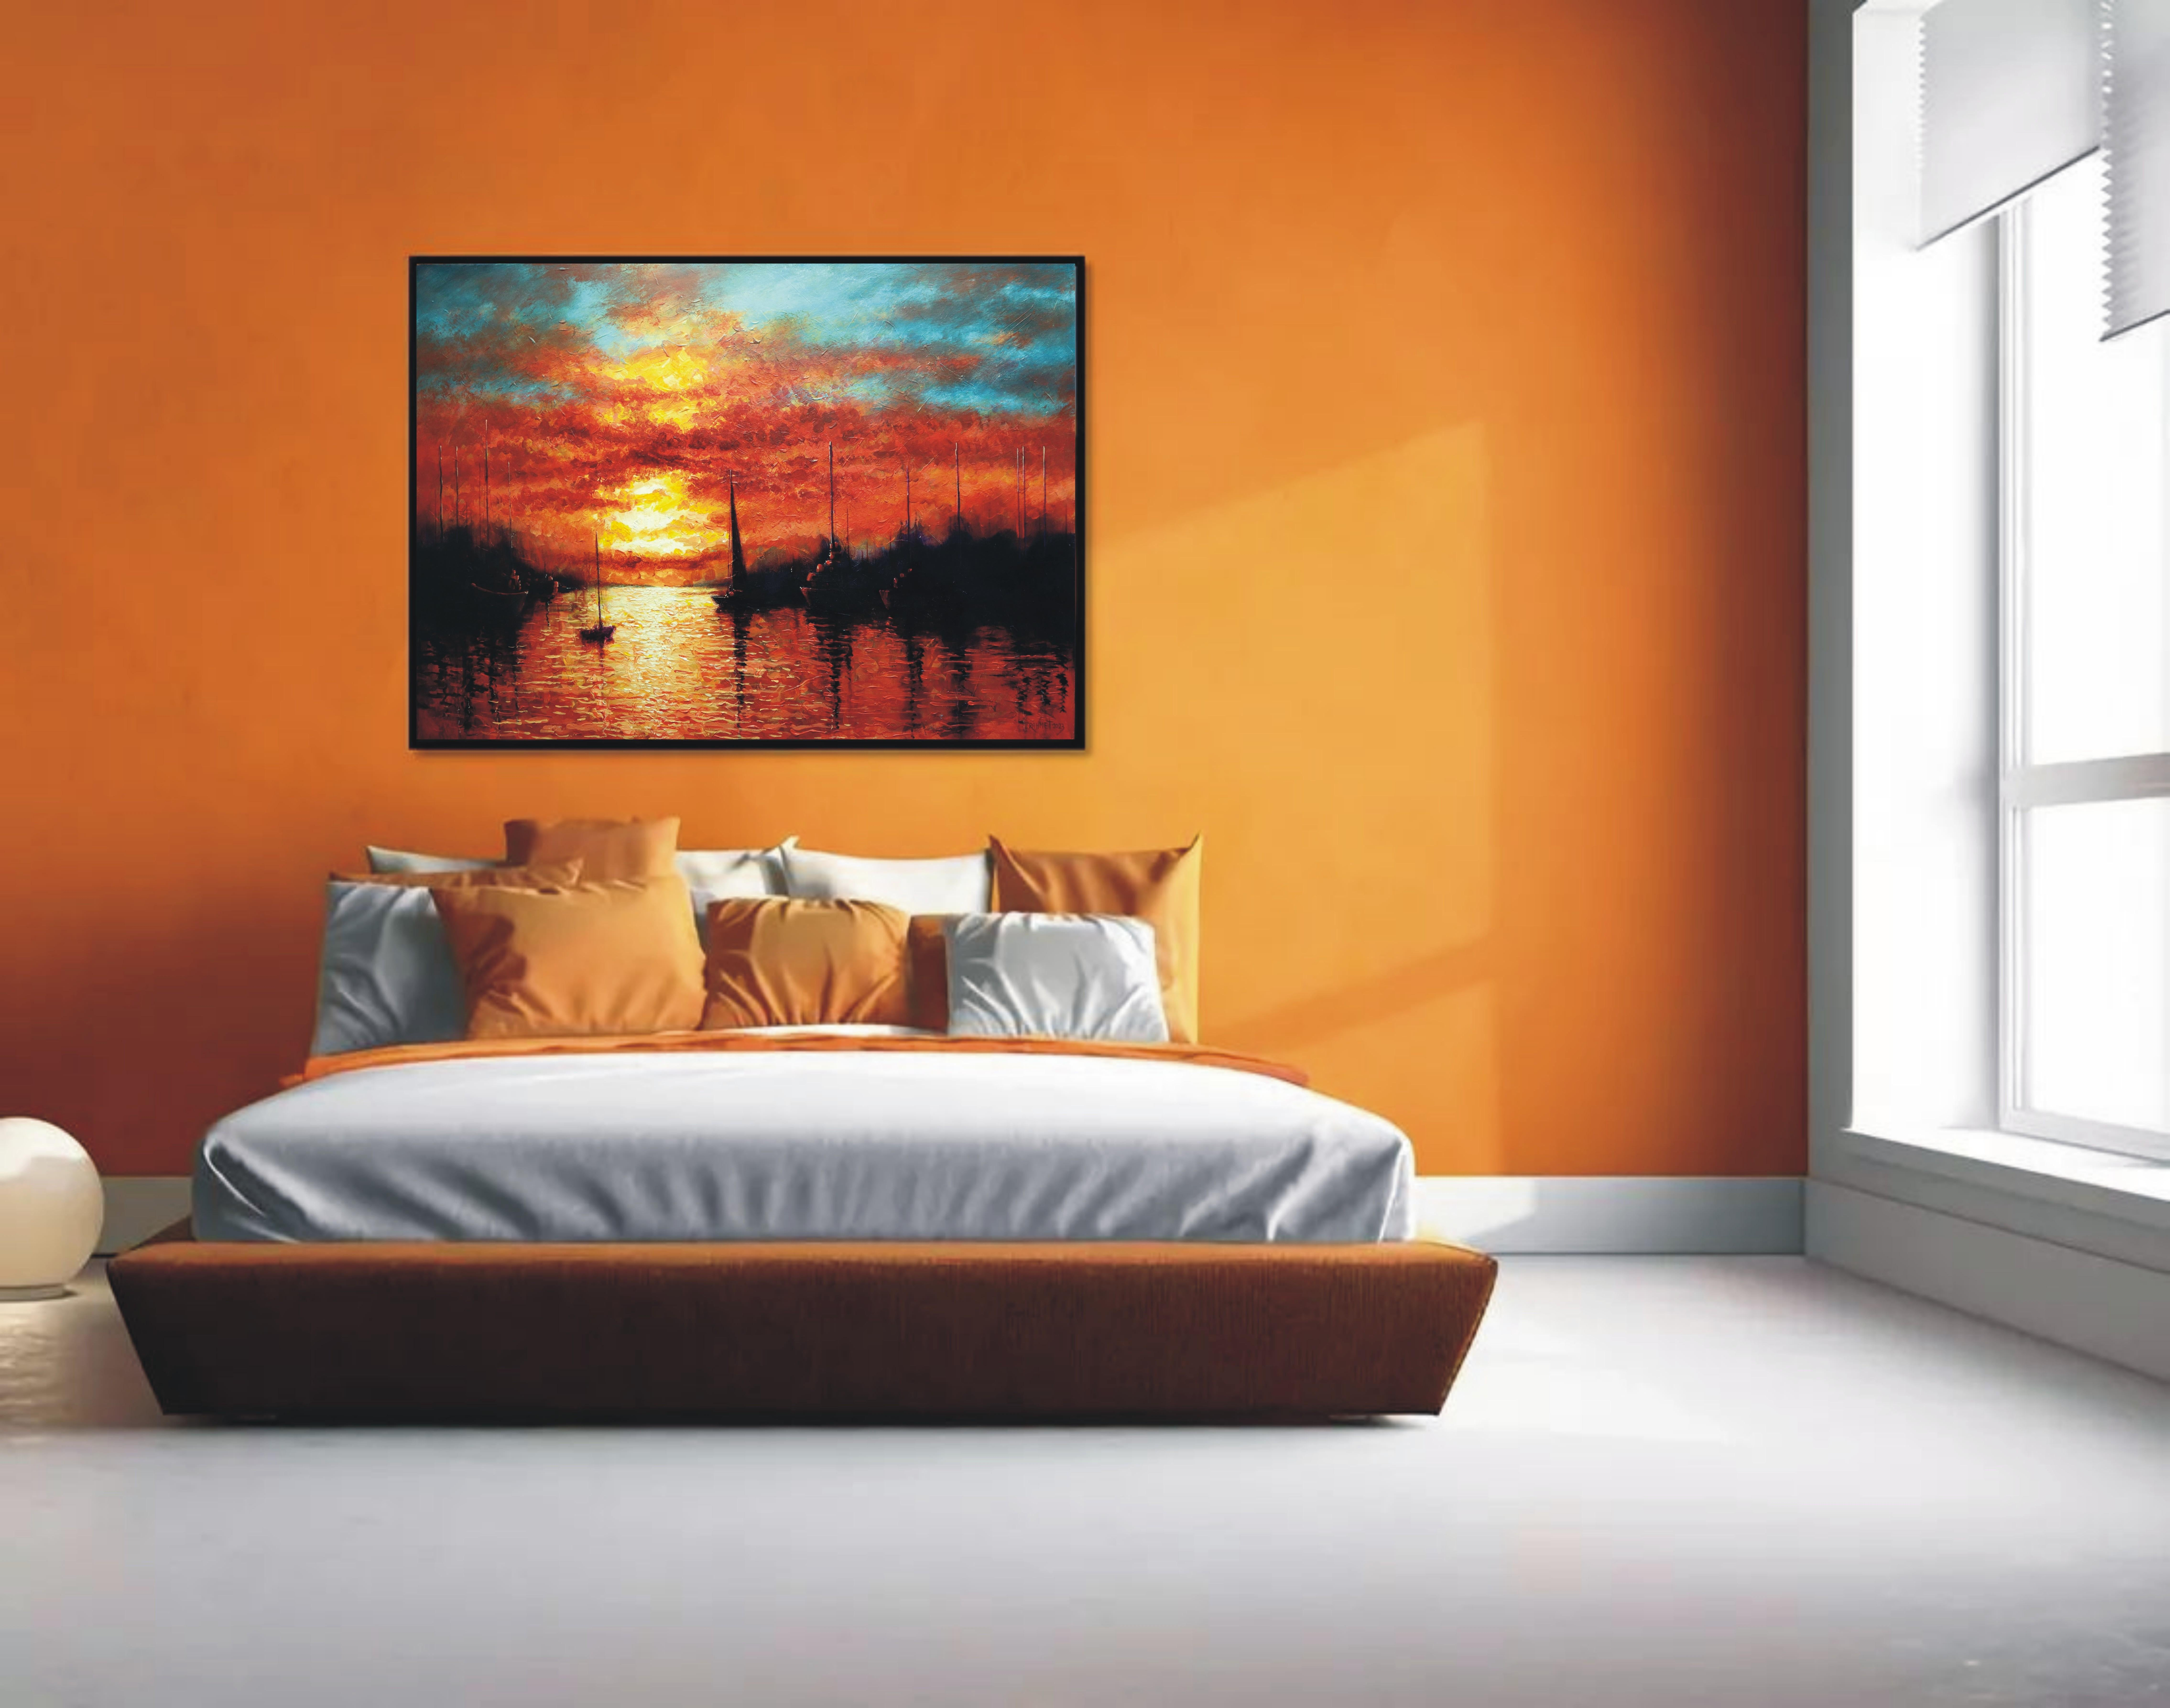 In this painting, I captured the vibrant energy of dawn, as nature awakens with effulgent light. Using acrylics and oils, I married realism and abstraction, inviting the viewer into a sensory experience. Every brushstroke embodies a moment of